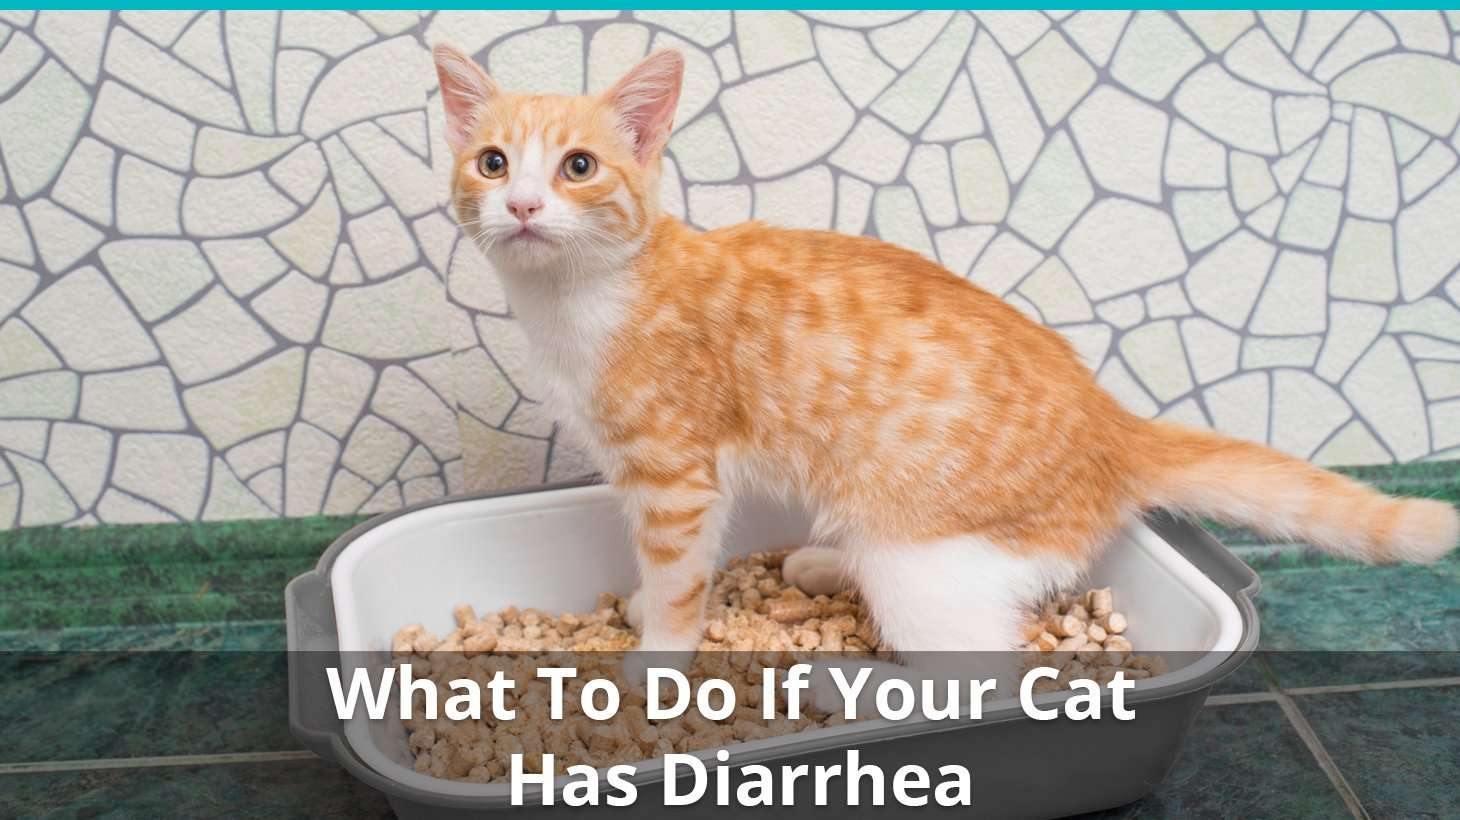 What To Do When Your Cat Has Diarrhea or Runny Poo